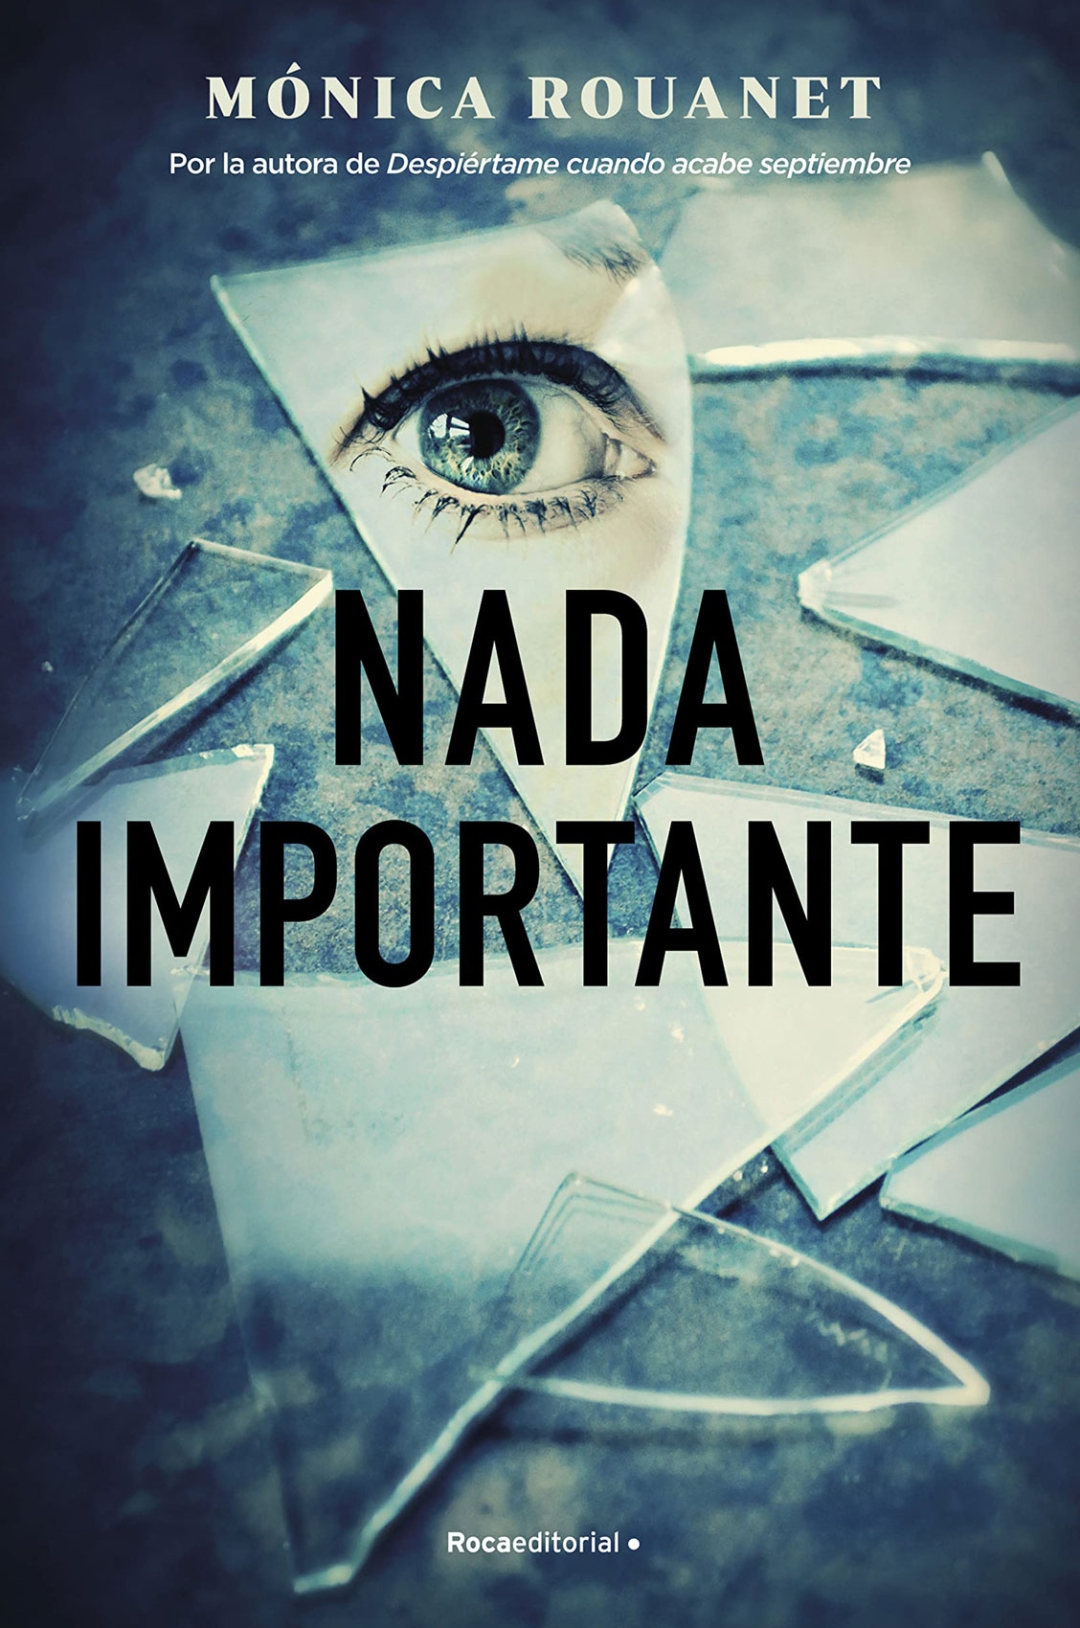 Cover of ‘Nada importante’, the latest novel published by writer Mónica Rouanet